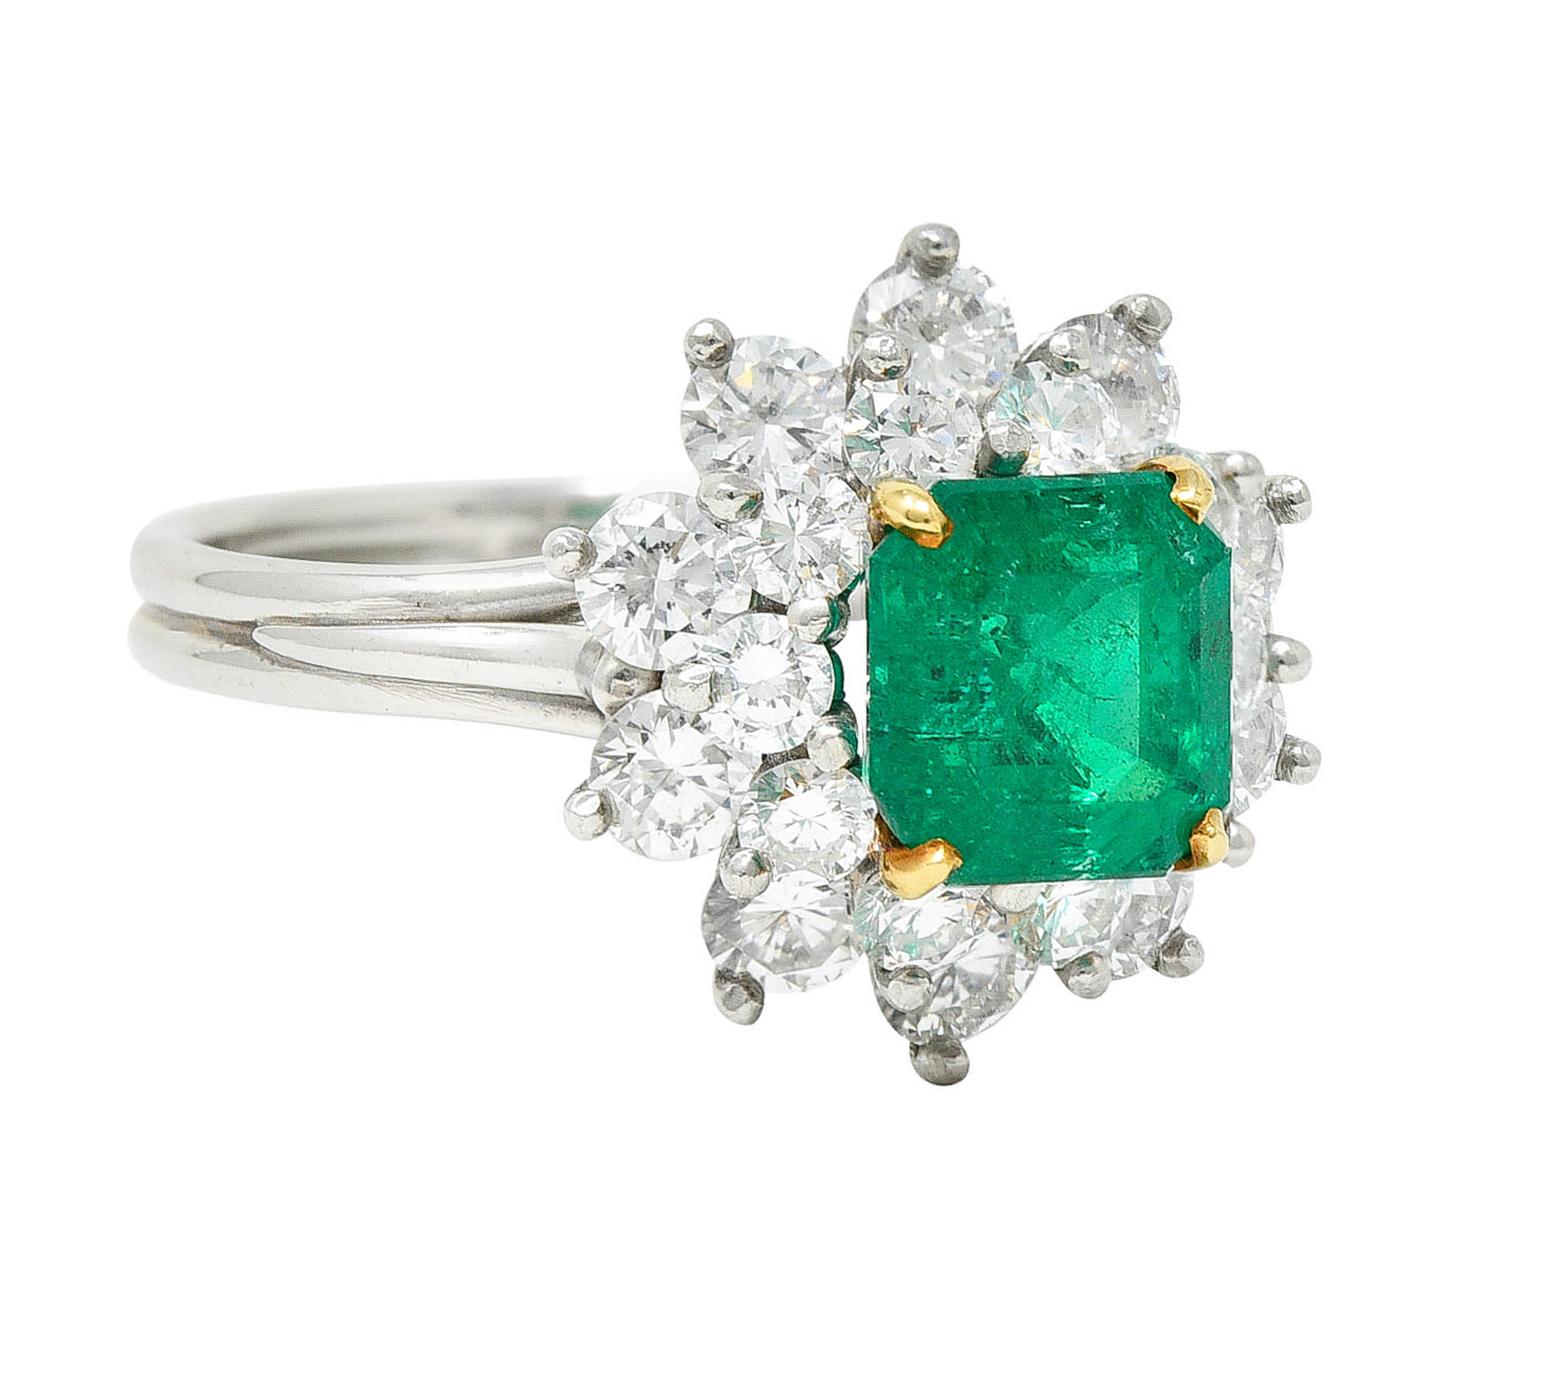 Featuring an emerald cut emerald weighing approximately 1.50 carats

Vividly and uniformly green and semi-transparent with natural two-phase inclusions - one surface reaching

Set by yellow gold prongs and surround by a double diamond